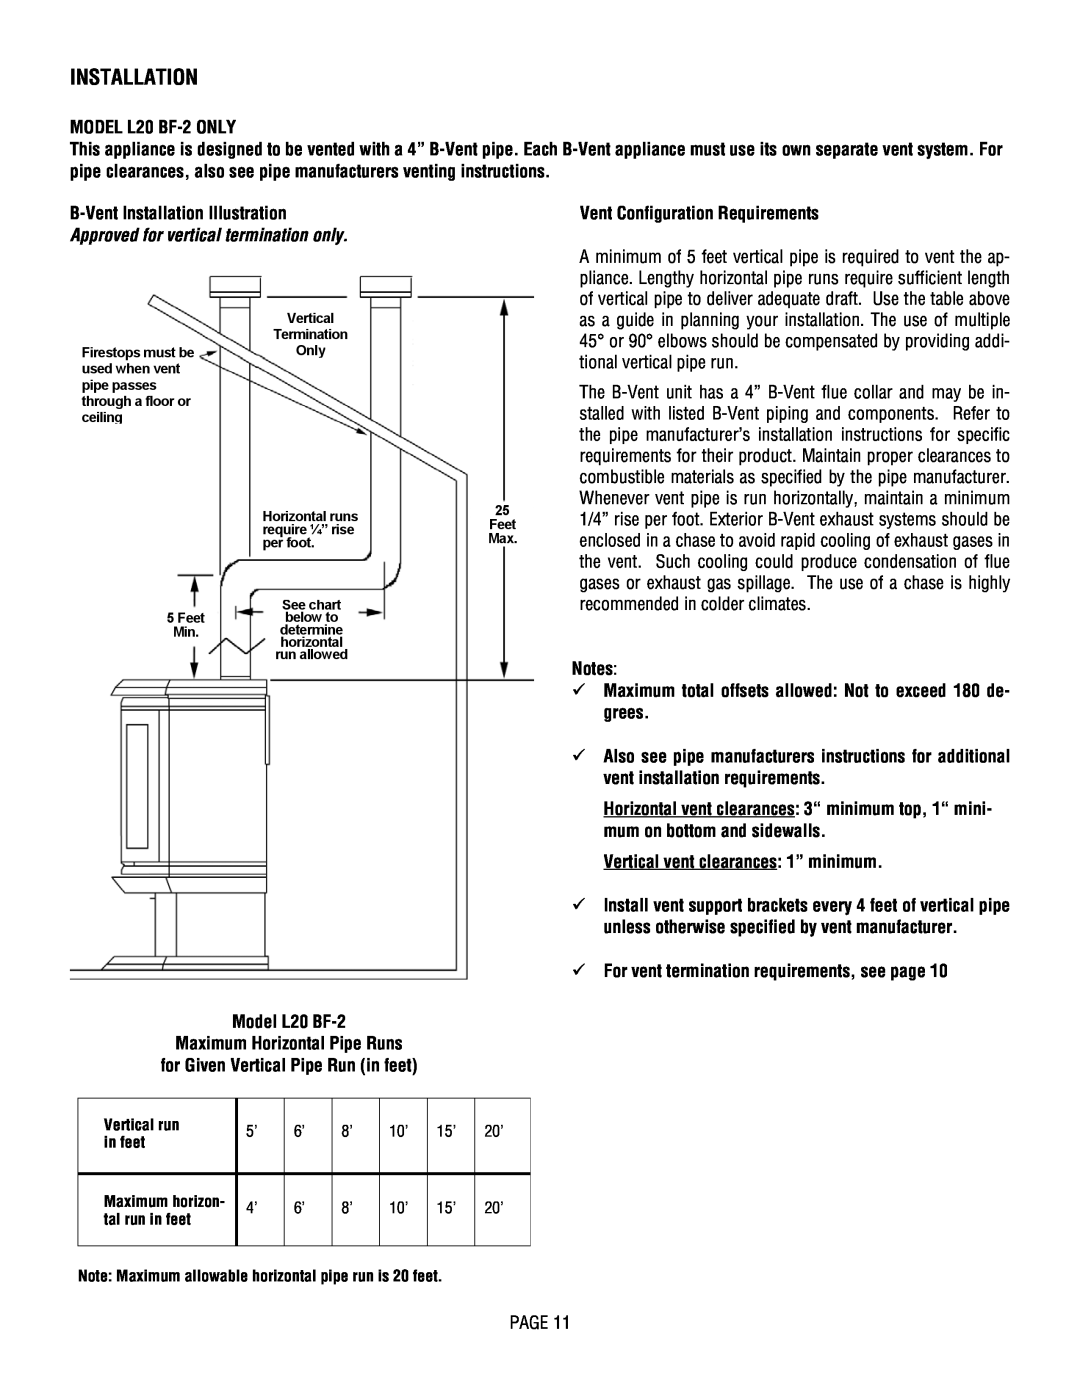 Lennox Hearth manual MODEL L20 BF-2ONLY, B-VentInstallation Illustration, Approved for vertical termination only 